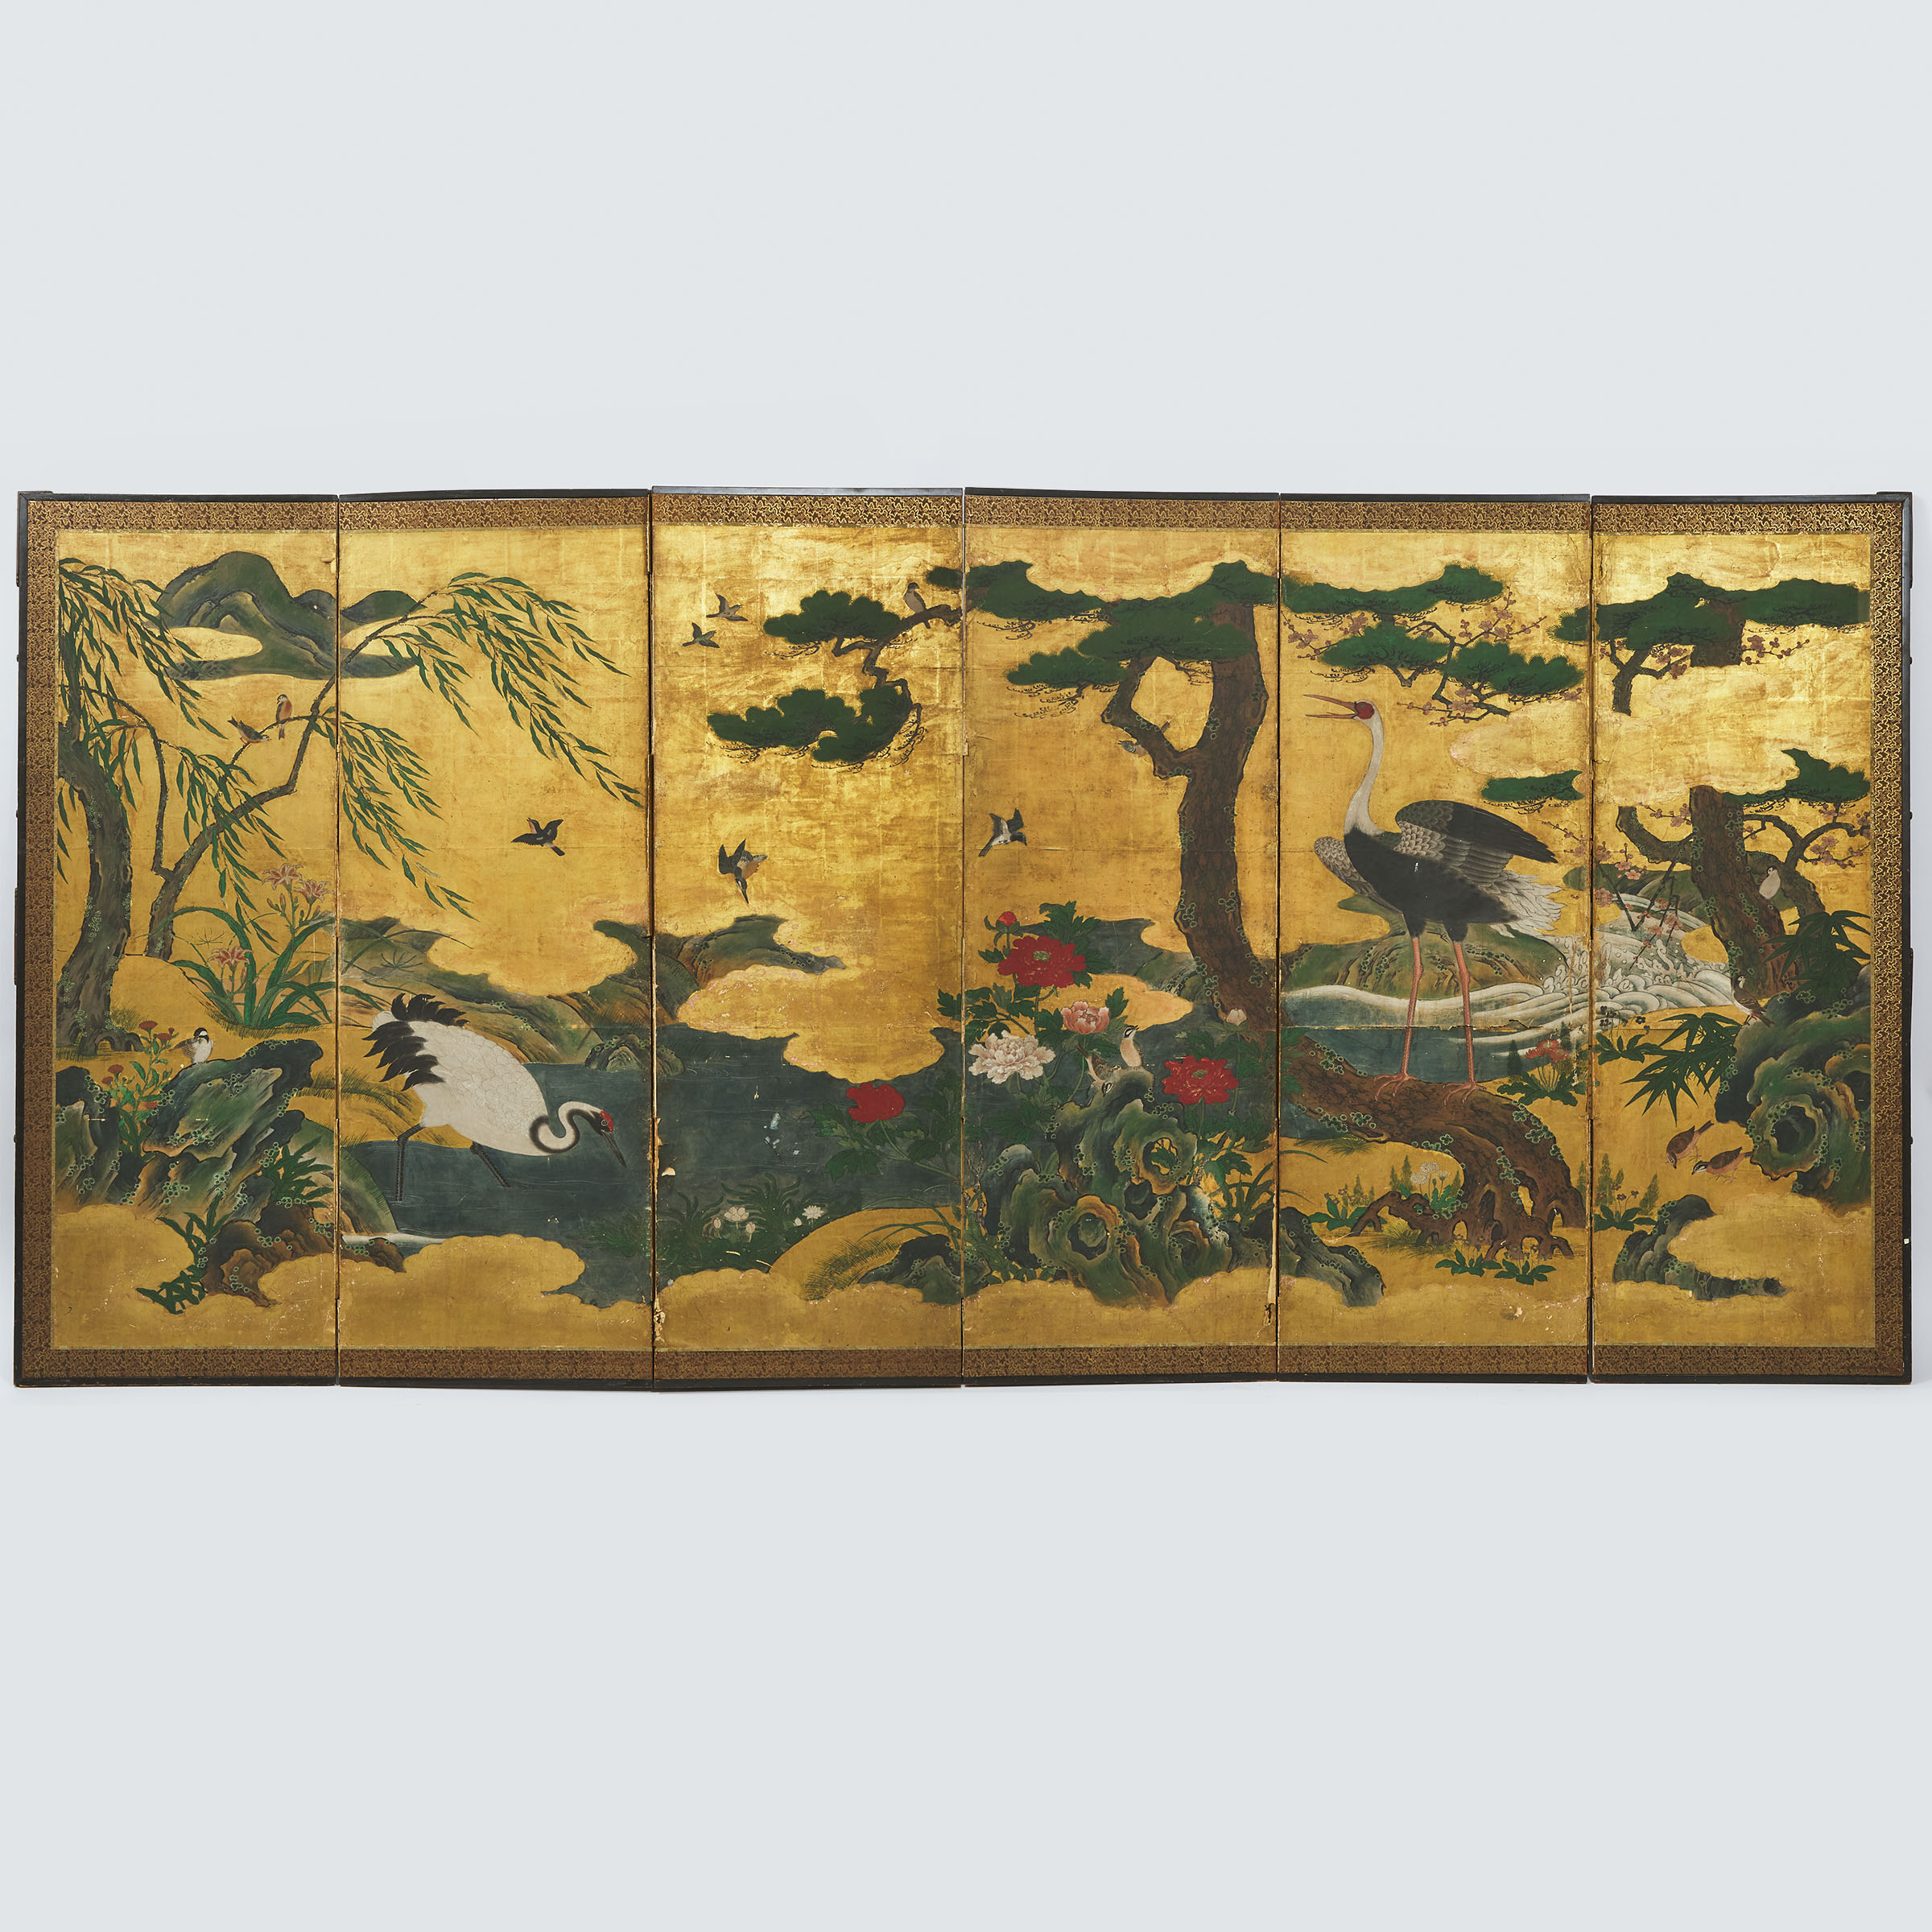 Attributed to Kano Shoei (1519-1592), Birds and Flowers of the Four Seasons